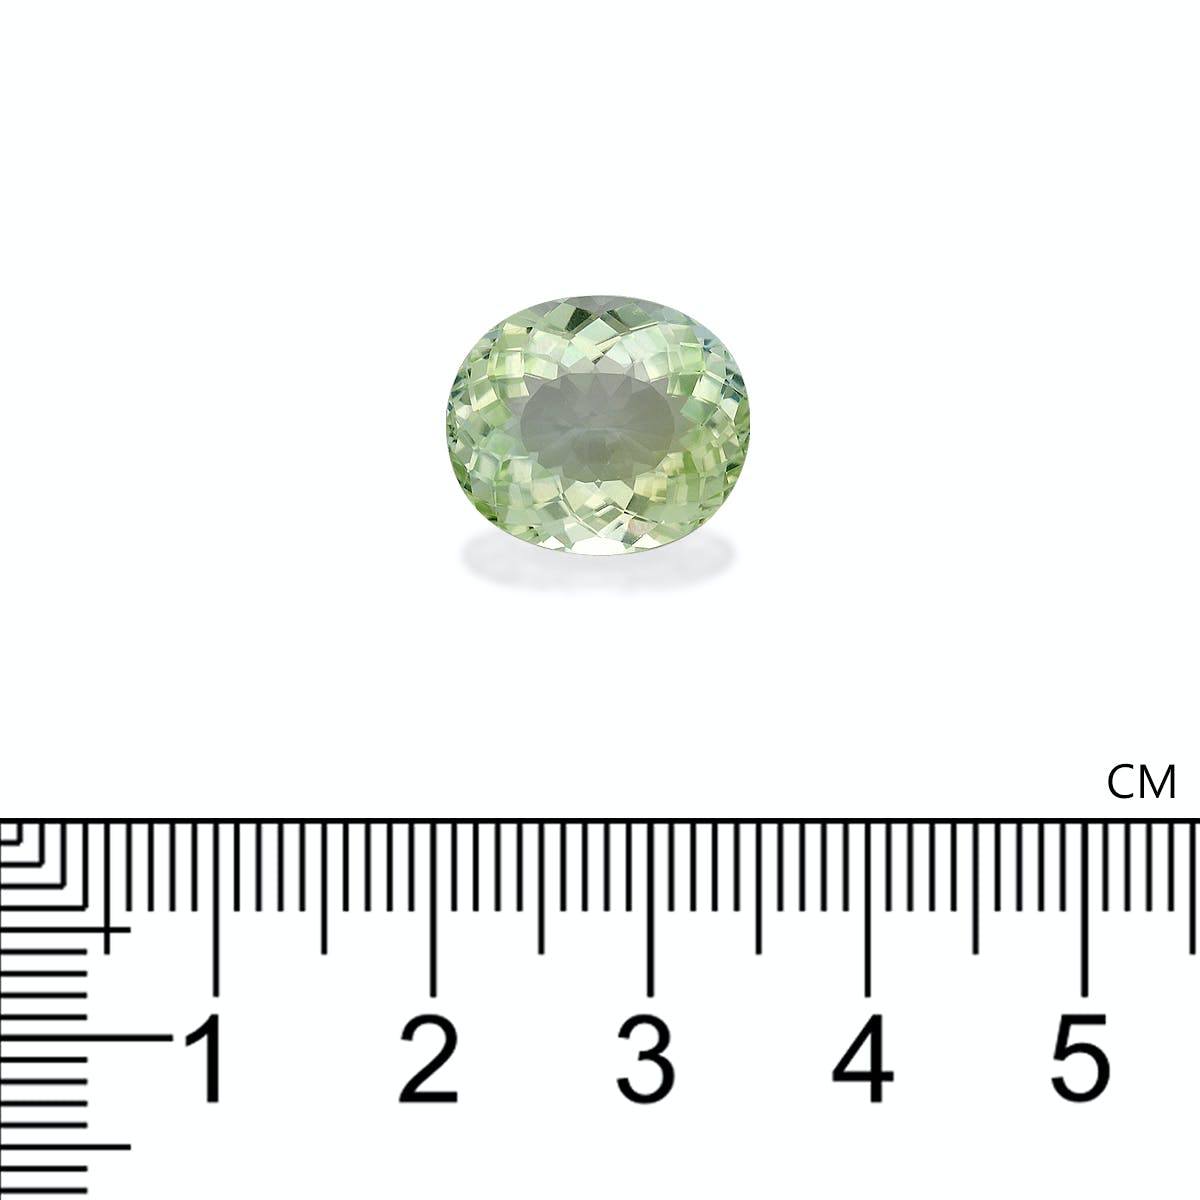 Picture of Pale Green Cuprian Tourmaline 7.91ct - 14x12mm (MZ0219)